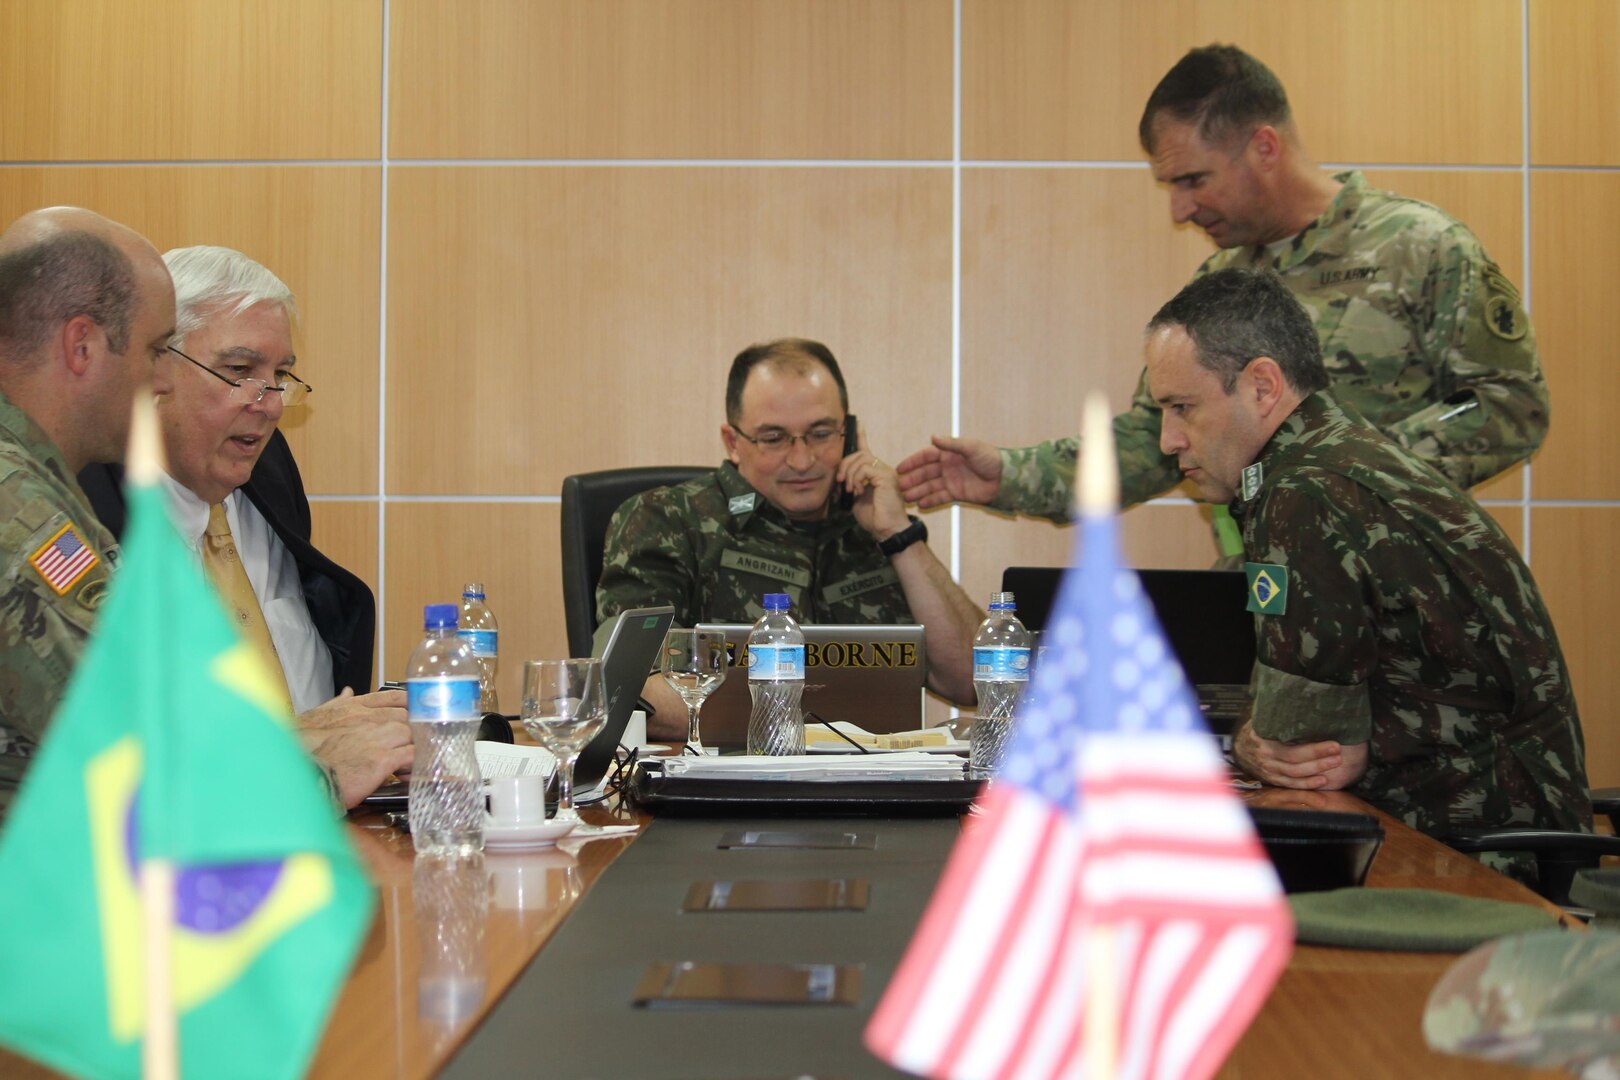 U.S. and Brazilian delegates participate in a work group July 24. Topics were broken out for further discussion such as personnel issues, logistics, engineering, science and technology, medical, international affairs, doctrine, training and operations, command and control, cyber, electronic warfare and intelligence, among others.